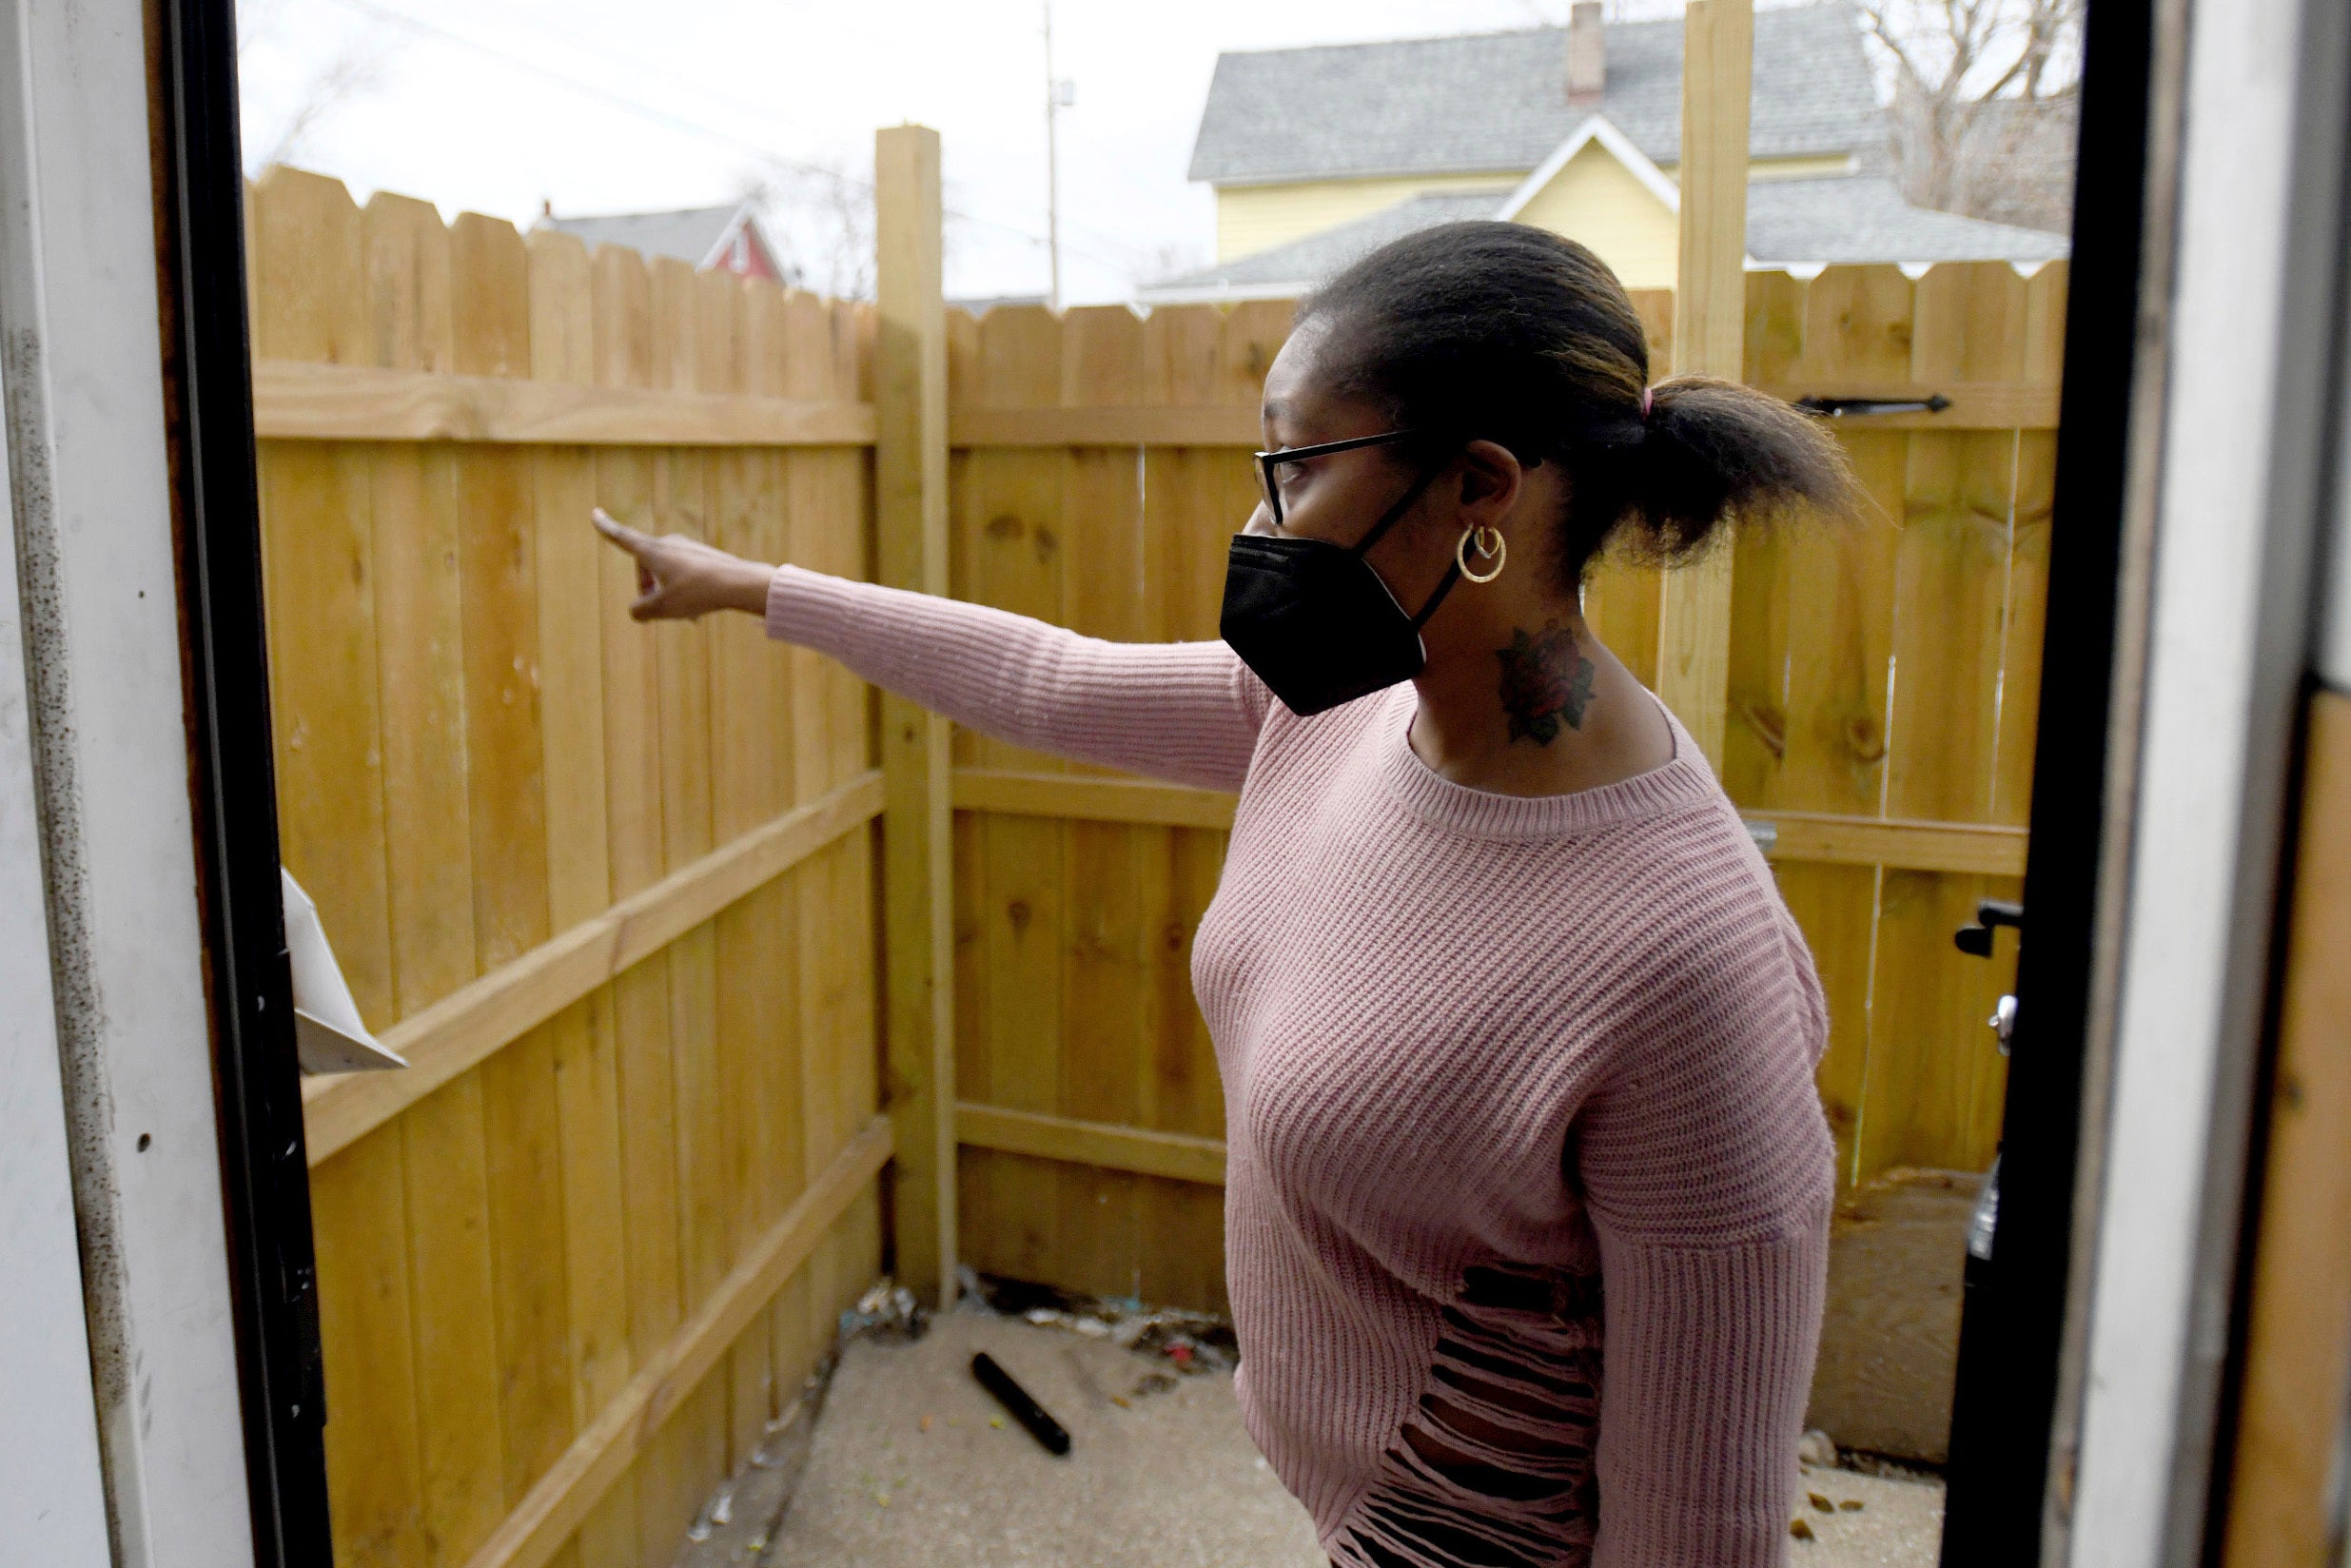 Marquetta Williams shows the fence of her family home after her husband James was allegedly shot by police officers without warning on Saturday